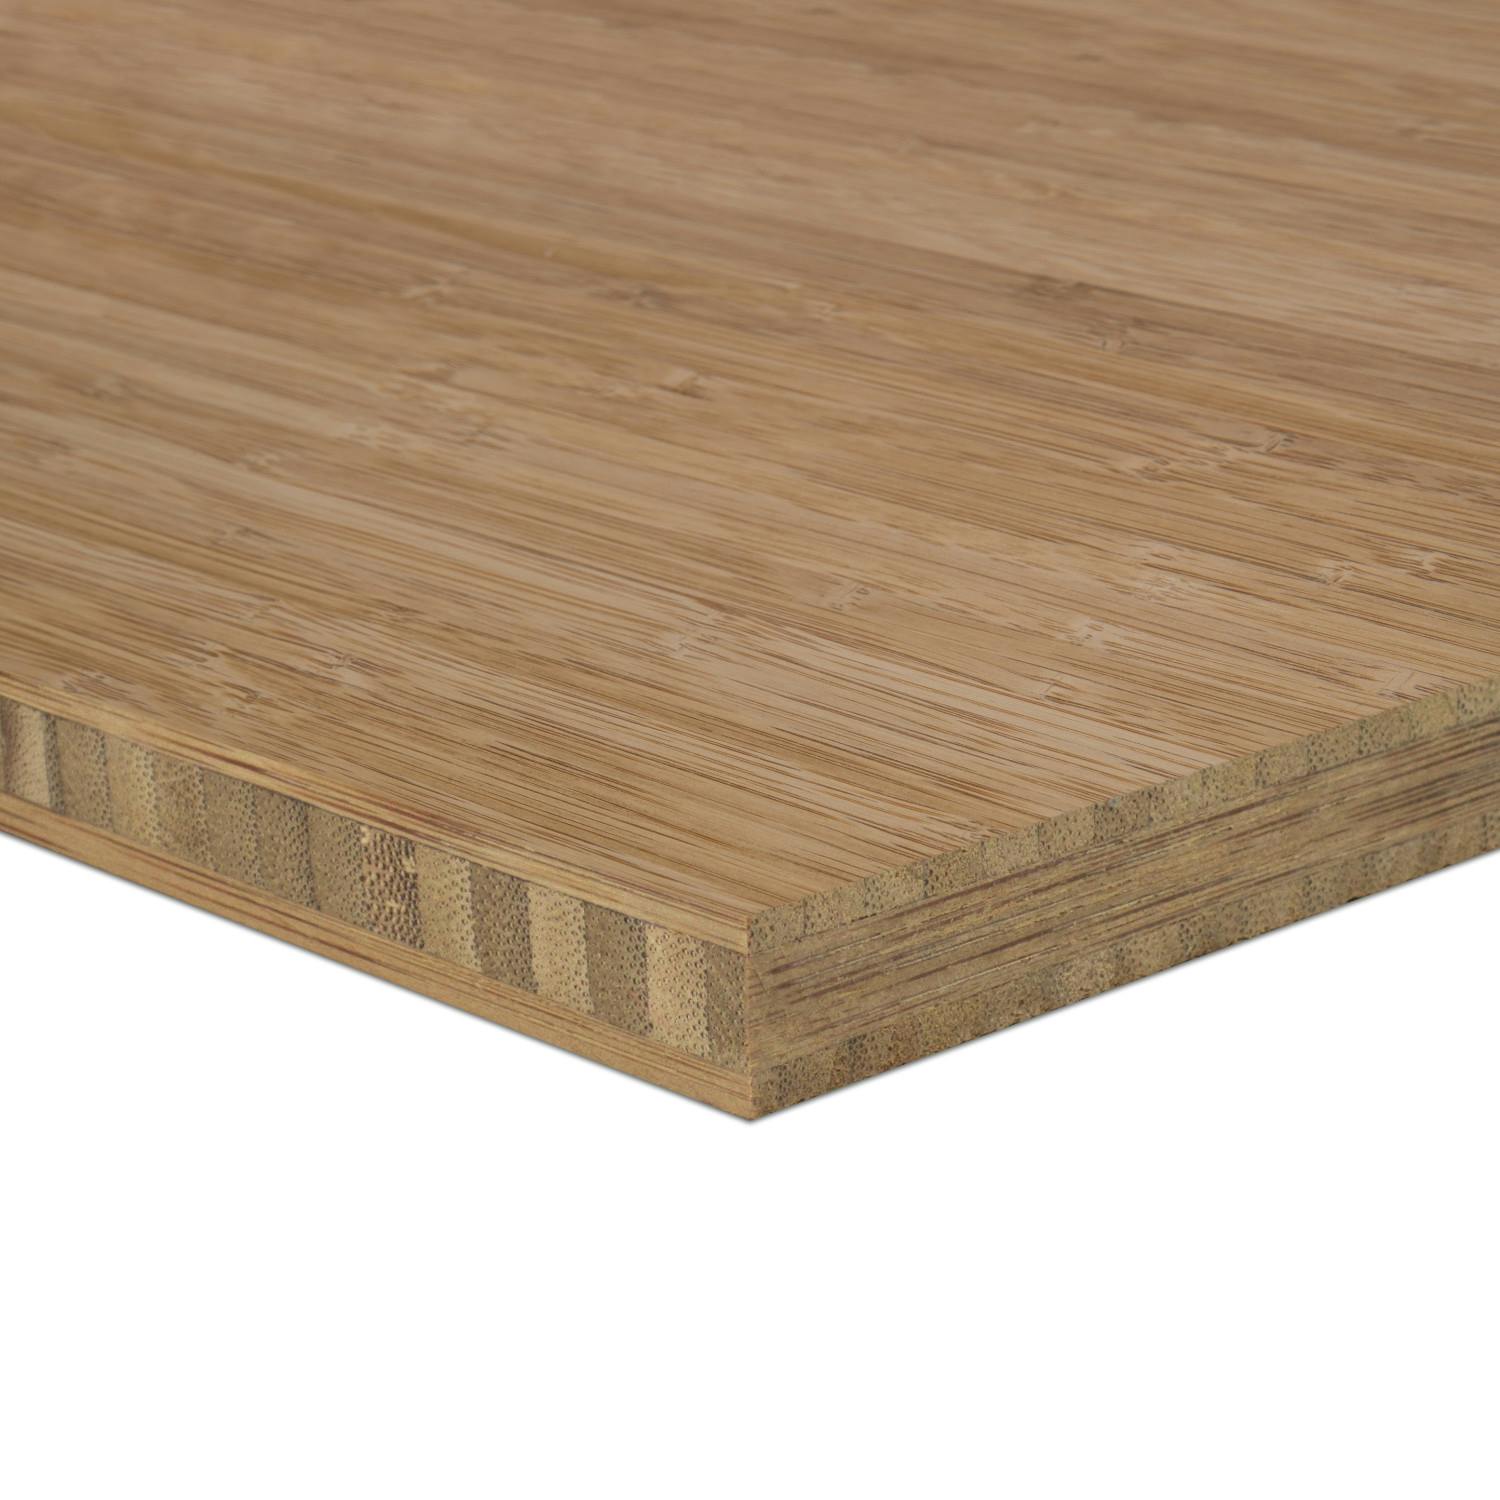 Bamboo Plywood - 3ply 1/2 in. Vertical Carbonized